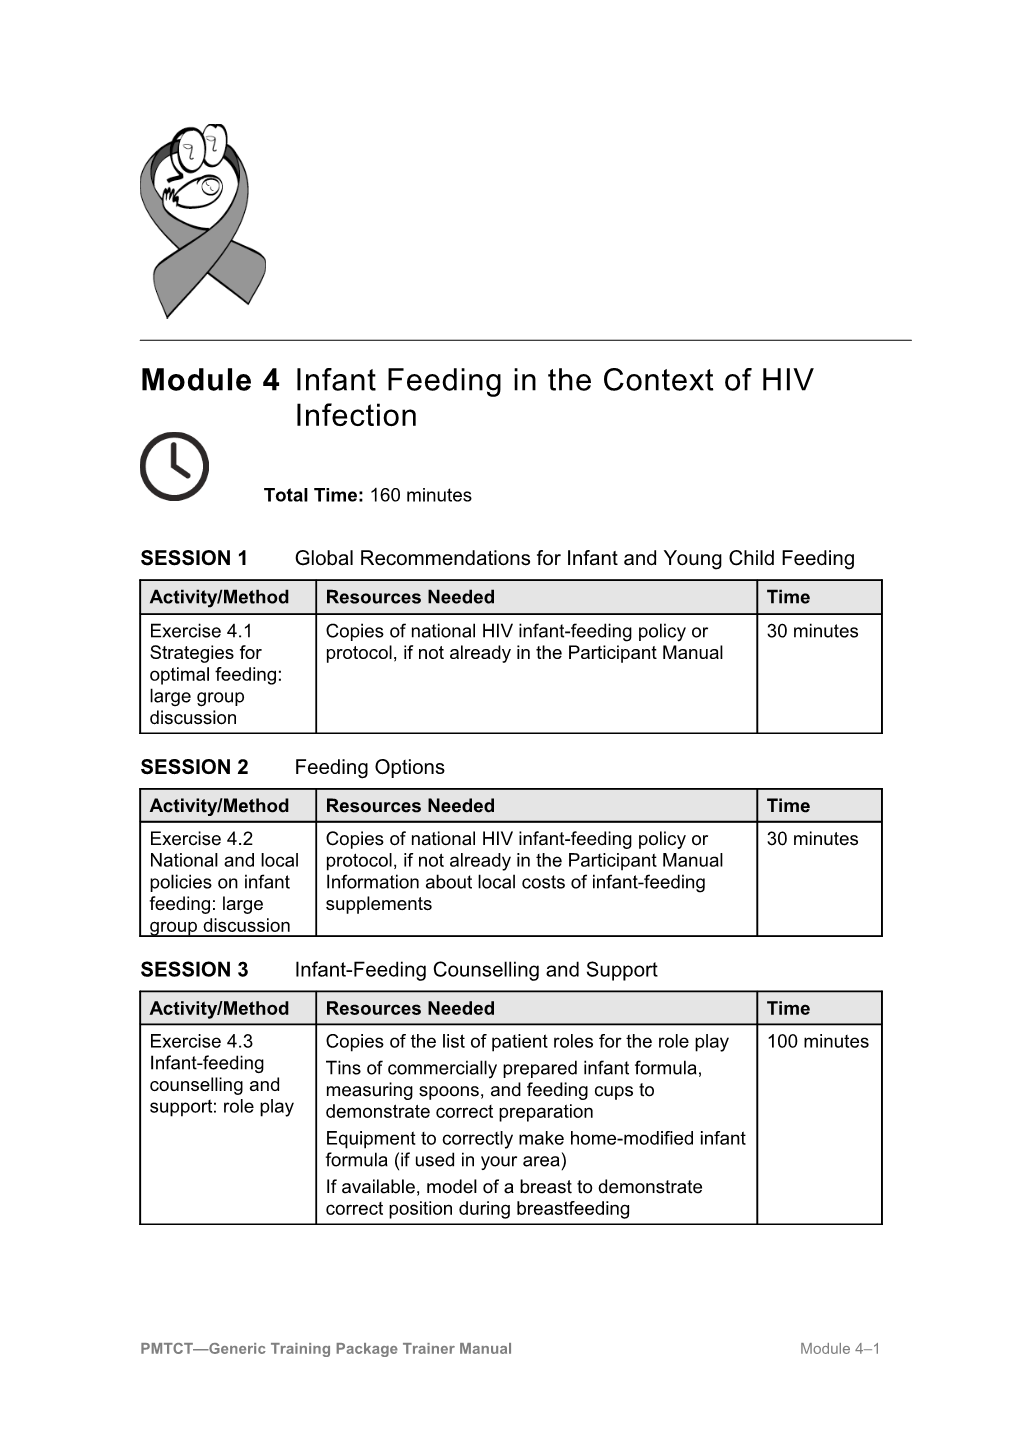 Module 4Infant Feeding in the Context of HIV Infection